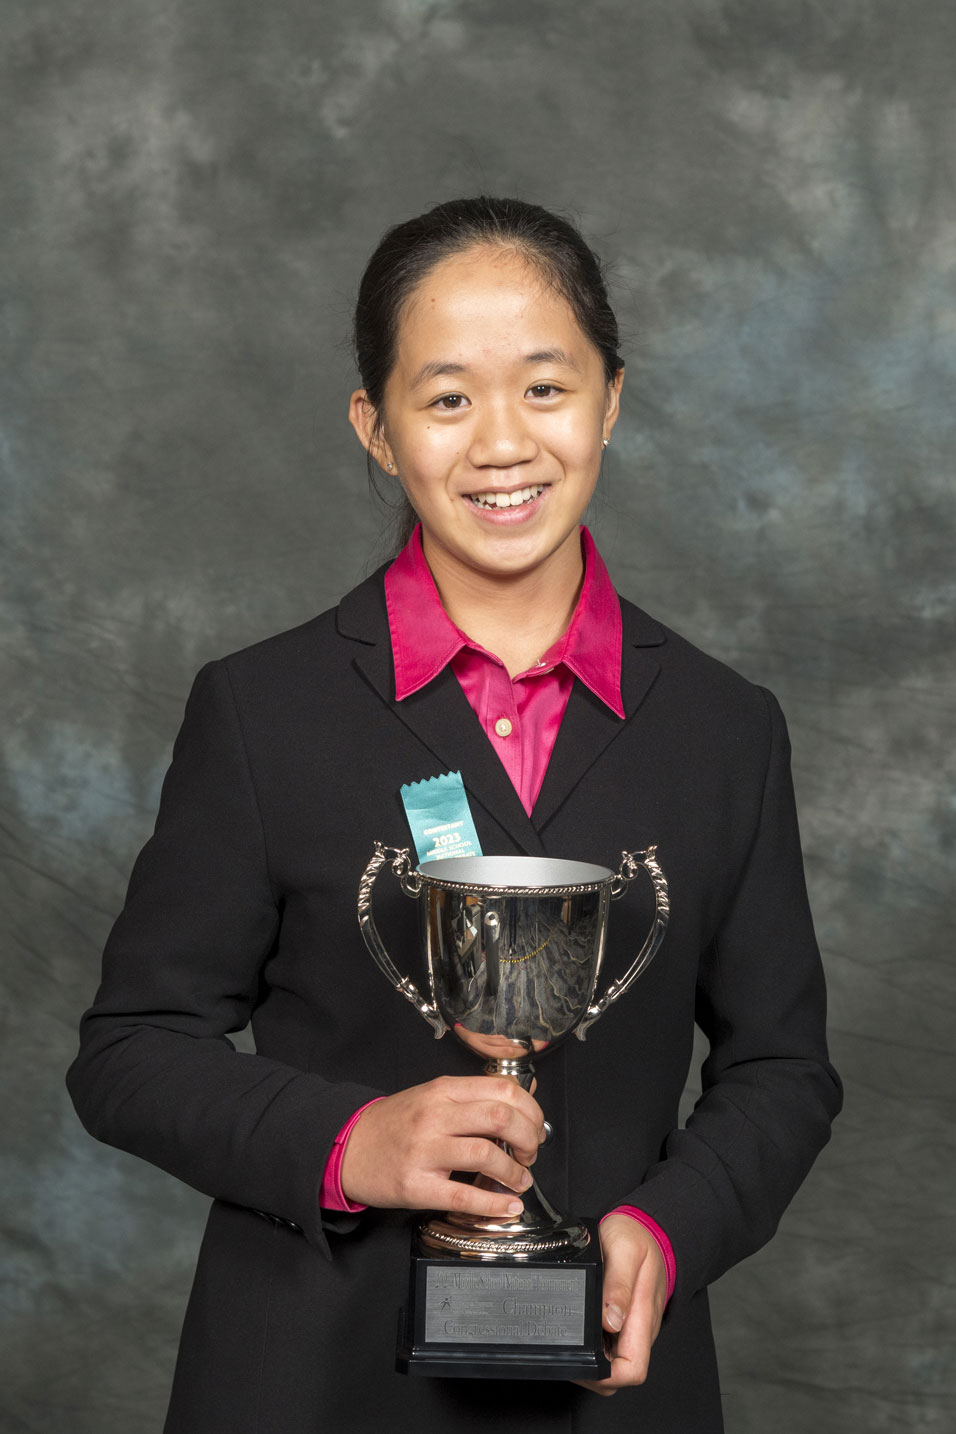 Katie Chan from Arizona College Prep Middle School in Arizona
Coached by Manjula Reddy